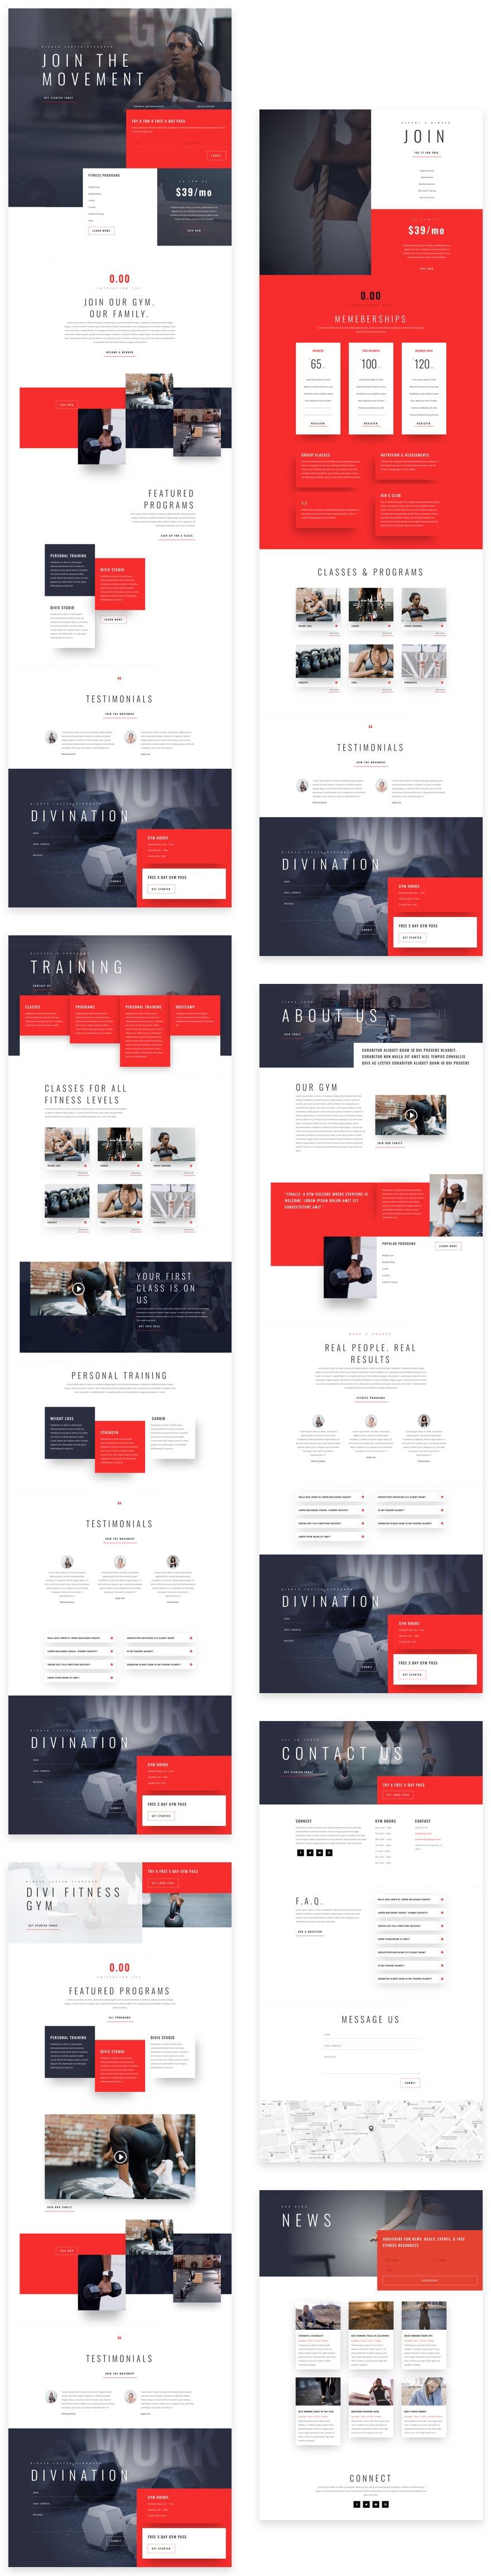 Divi Fitness Gym Layout Pack